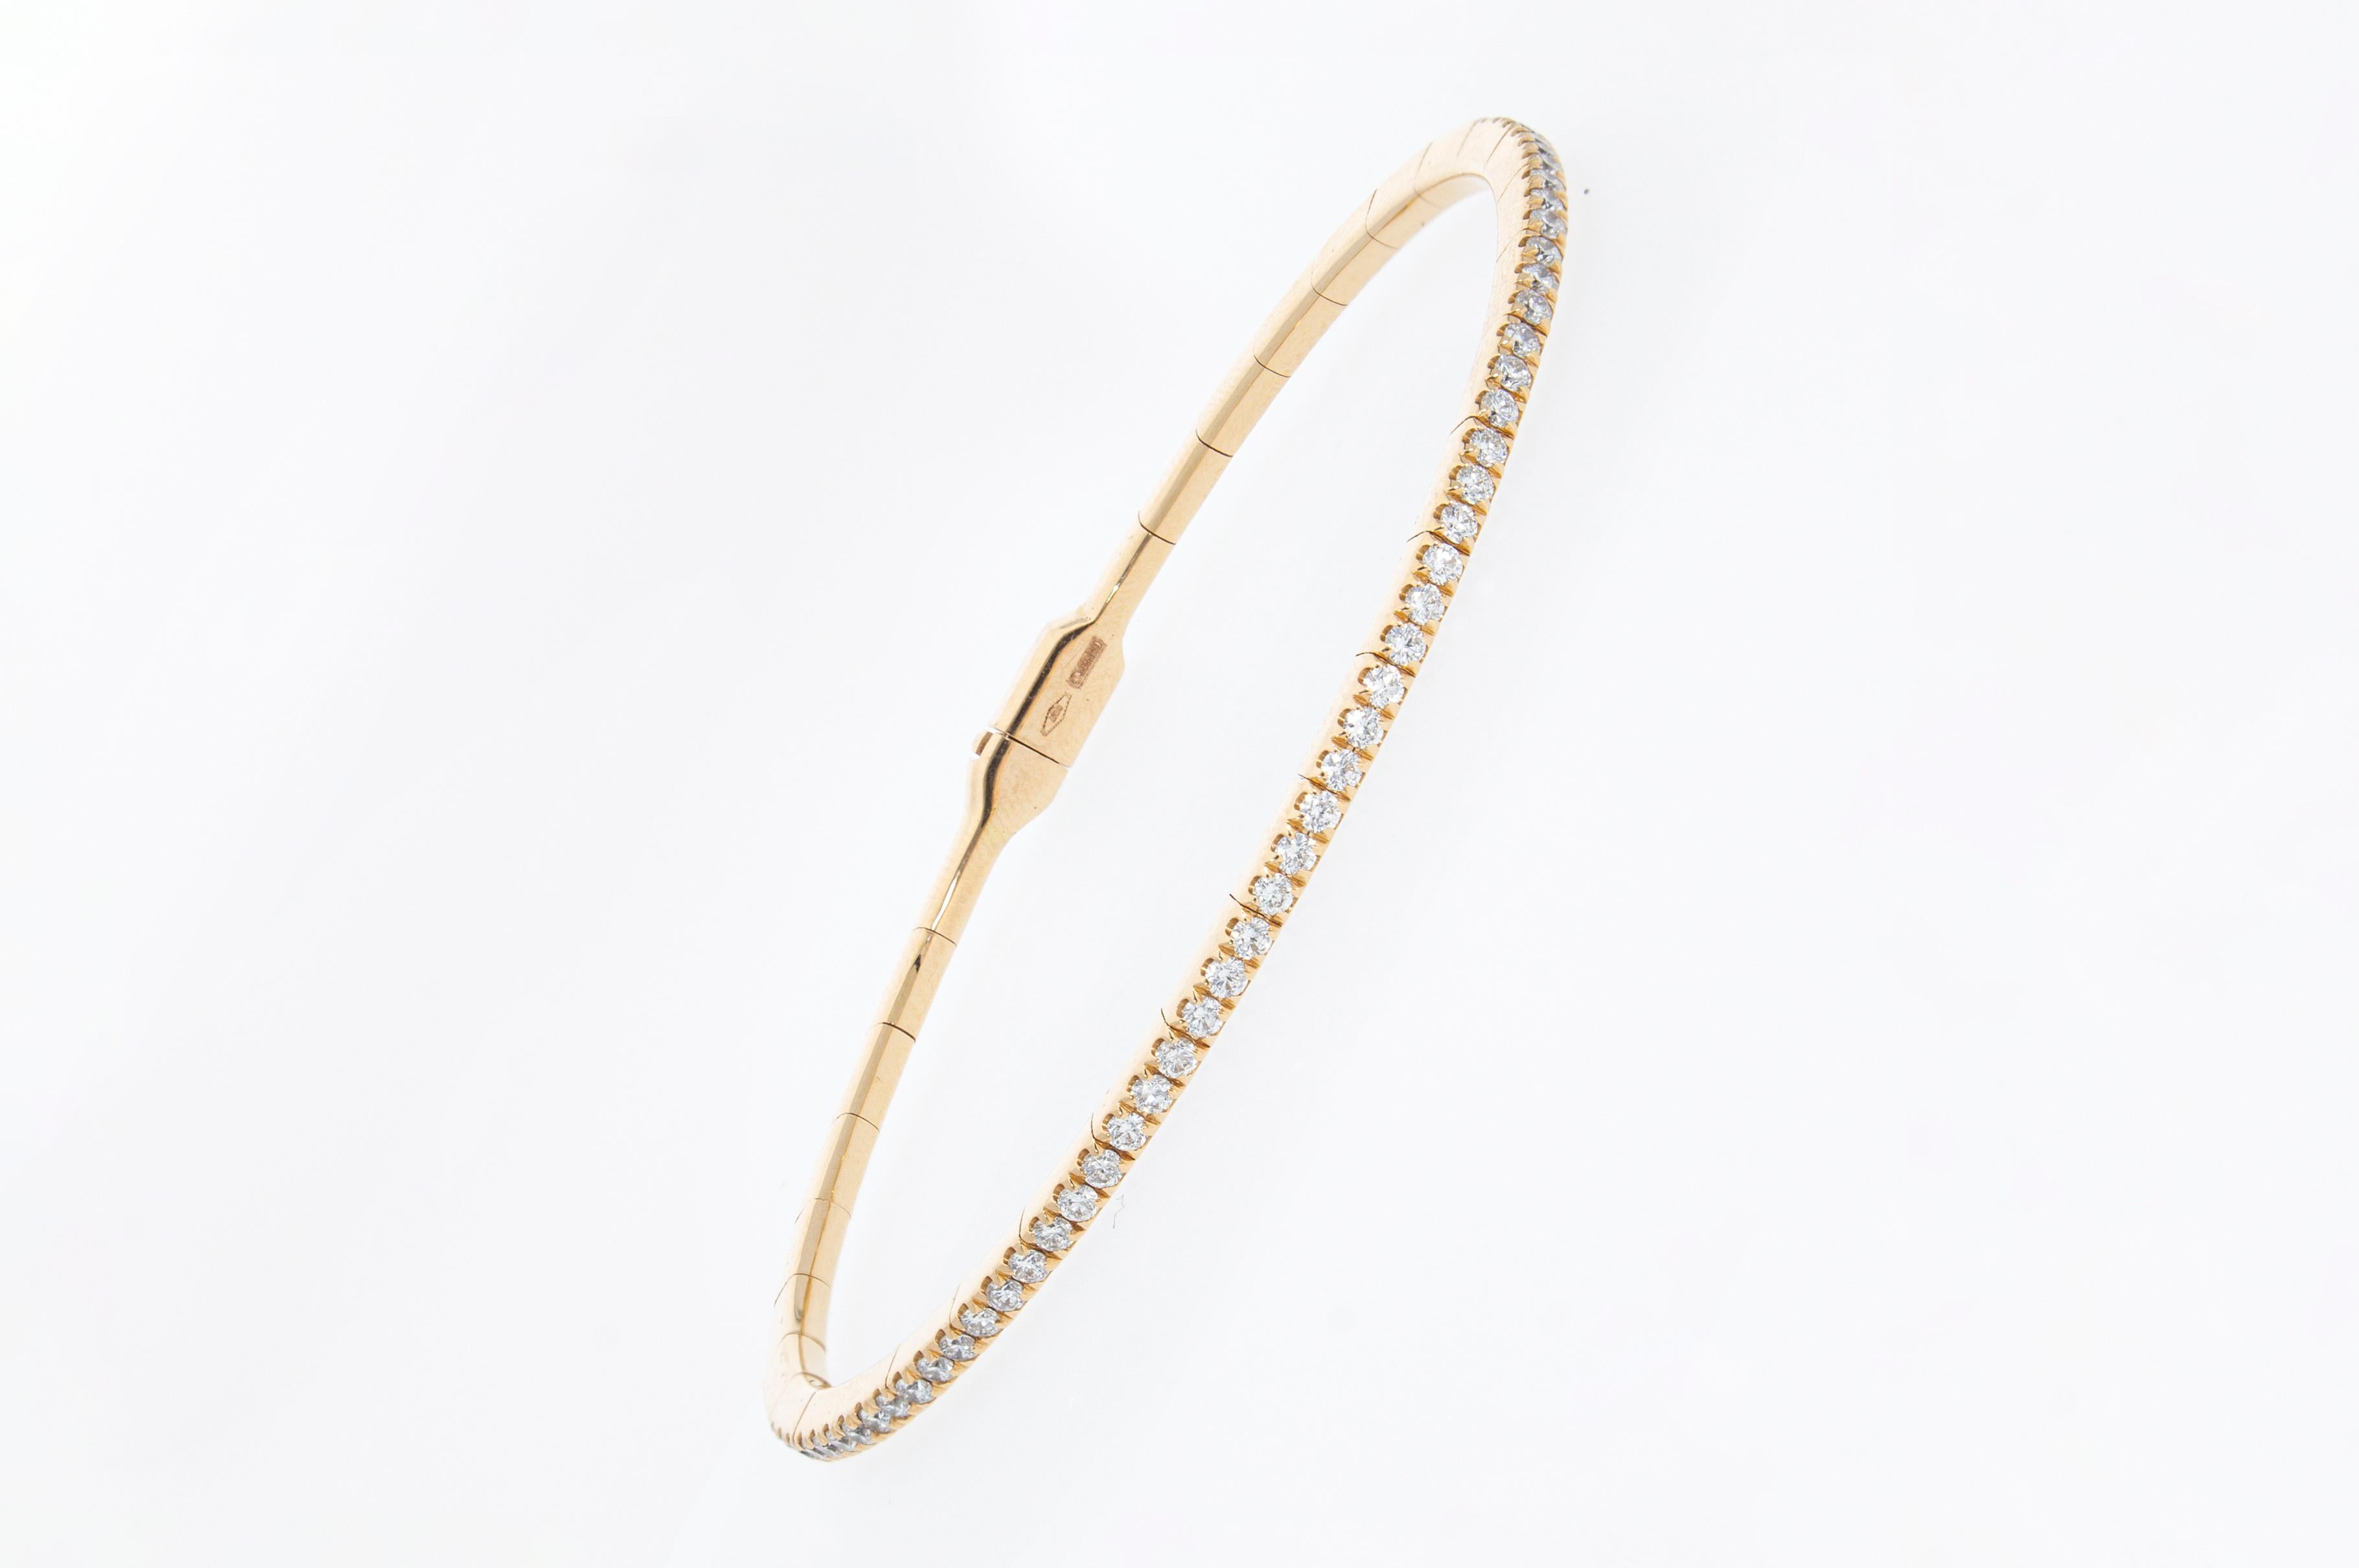 Women's Semi-rigid bracelet with a row of 0.75 ct of Diamonds. Gold 18 Kt. Made in Italy For Sale